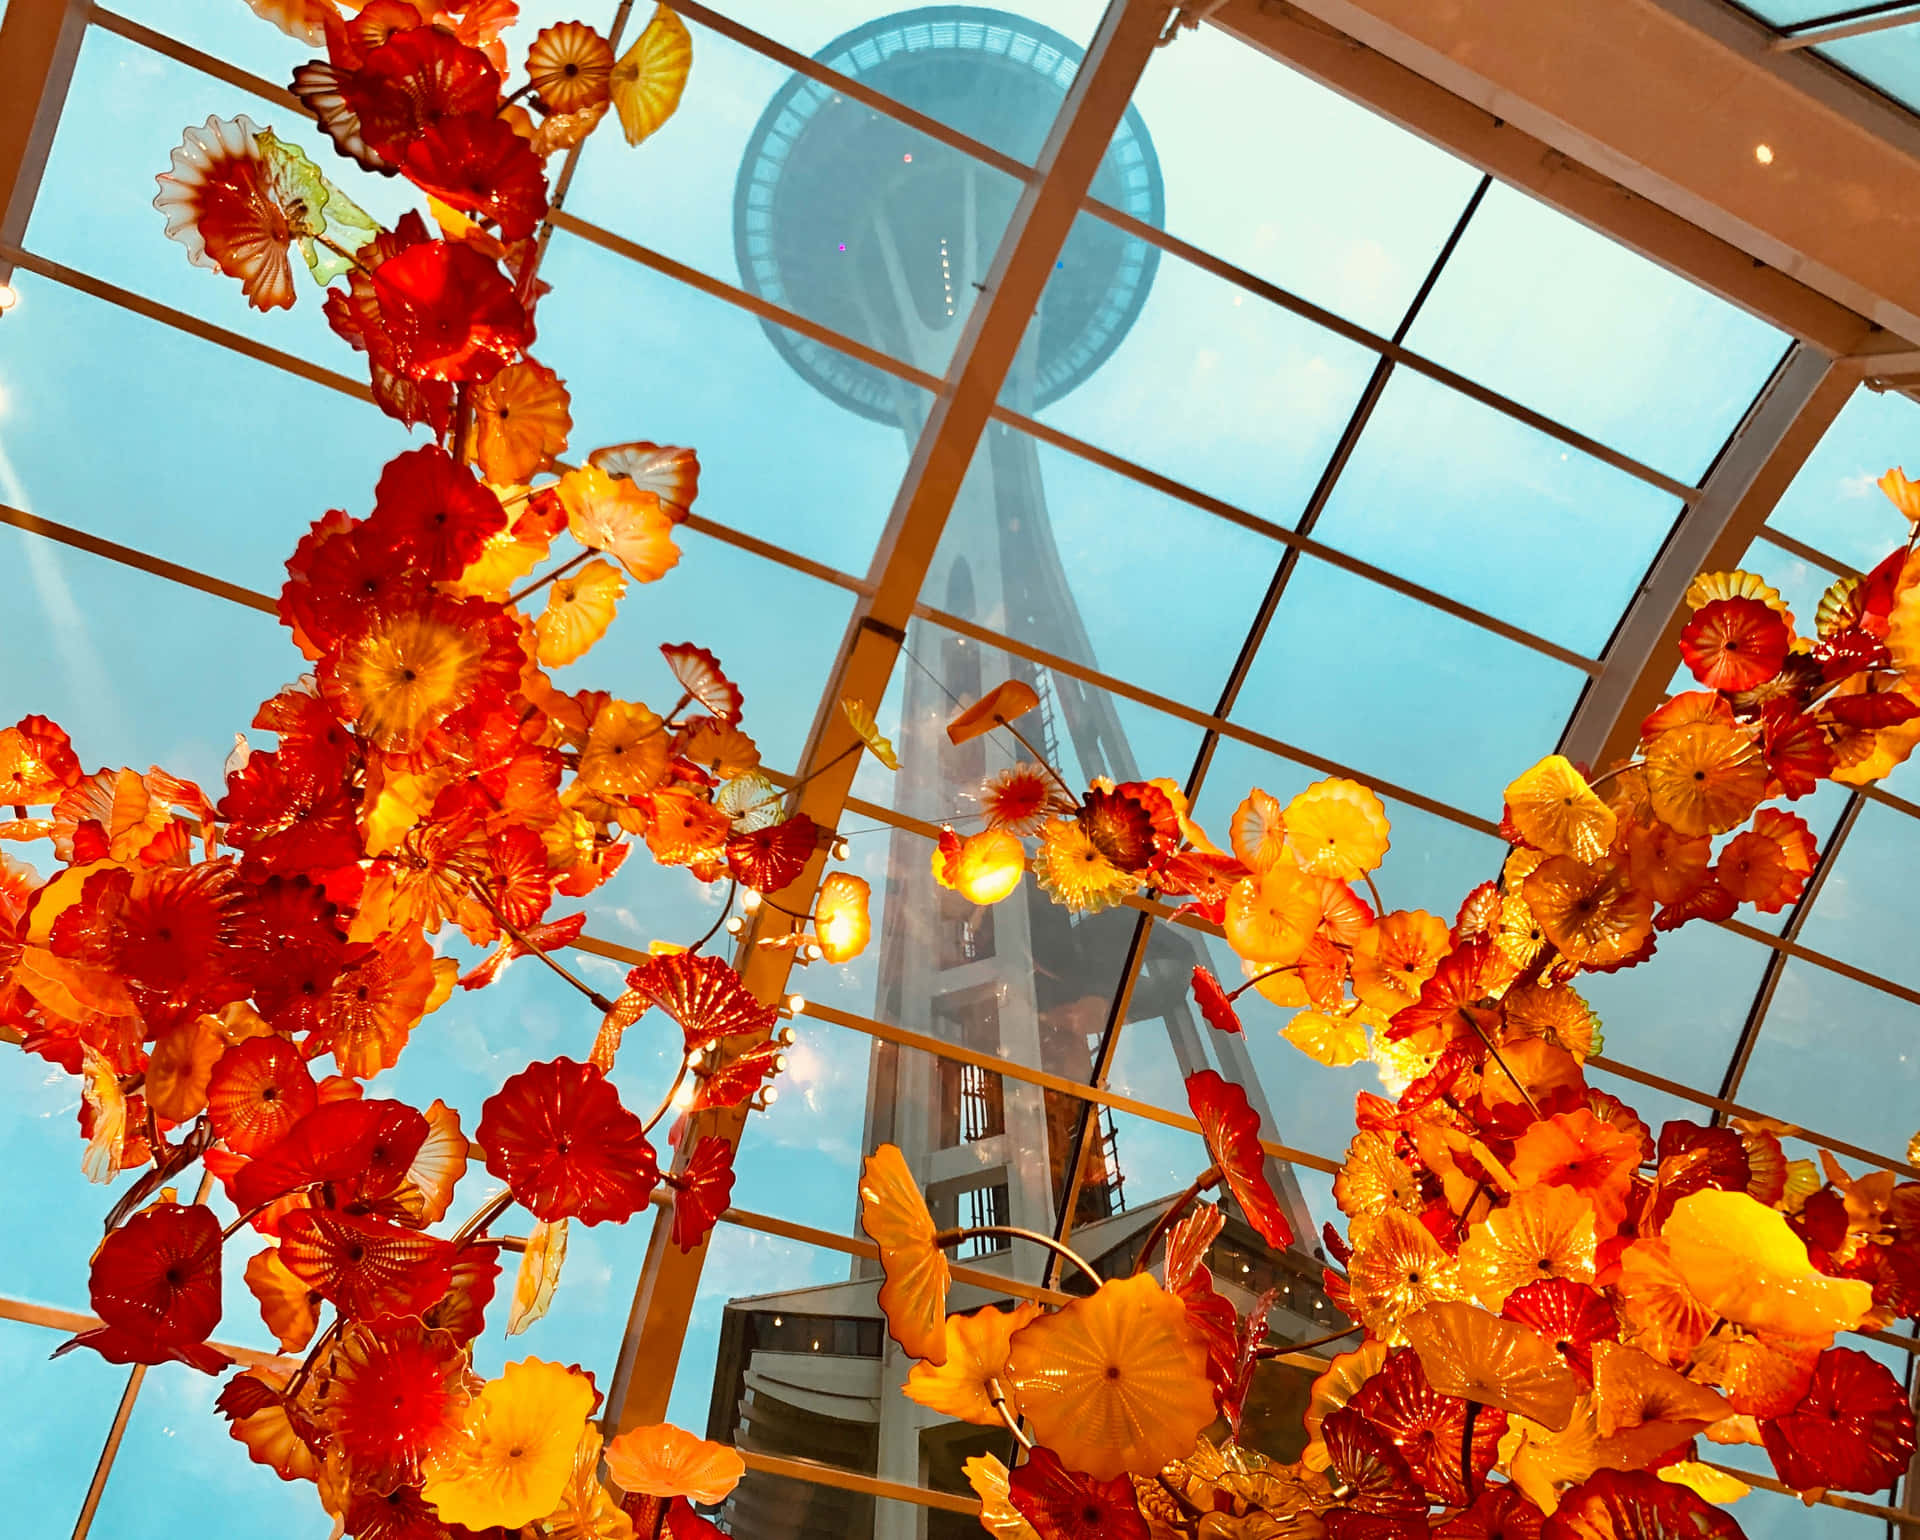 Space Needle Through Glass Ceilingwith Floral Display Wallpaper